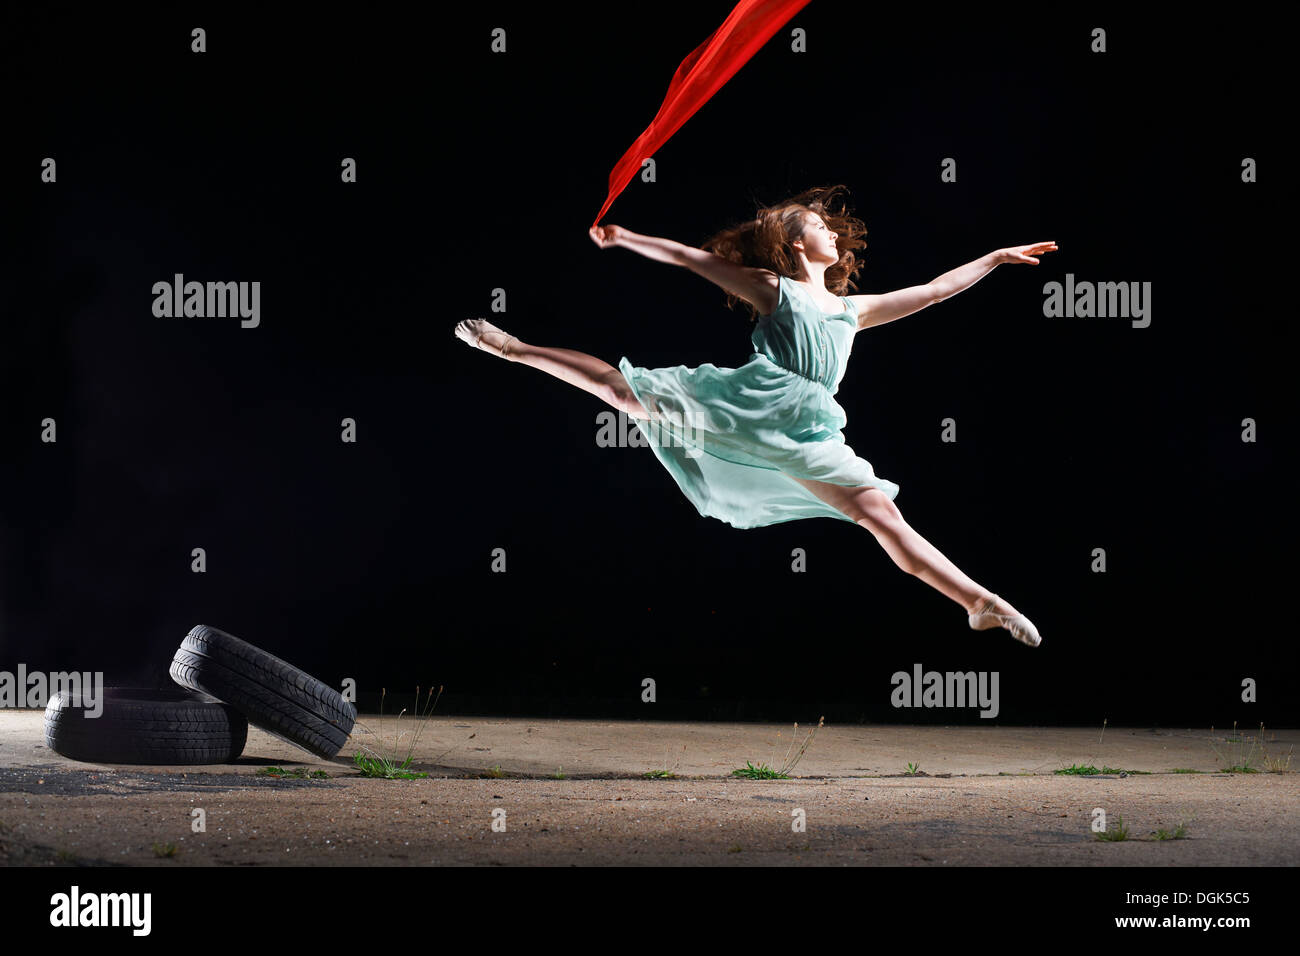 Ballet dancer leaping mid air holding foulard rouge Banque D'Images